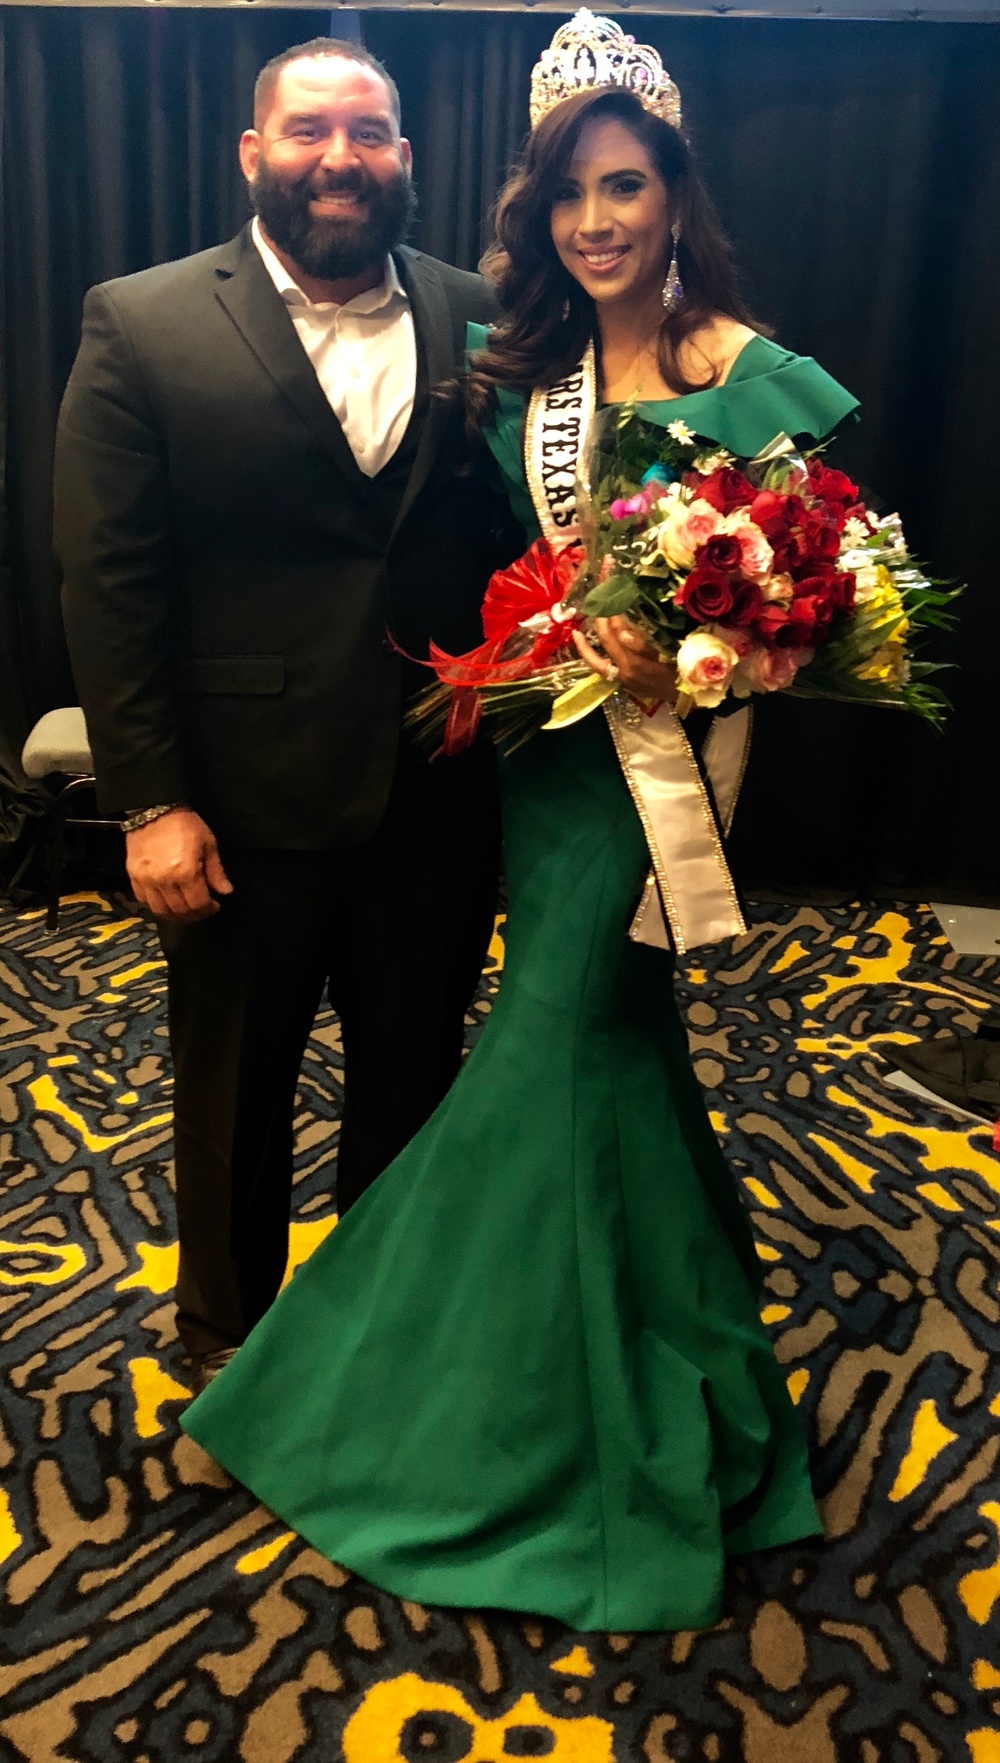 Texas Army National Guard soldier wins Mrs. Texas Galaxy Pageant